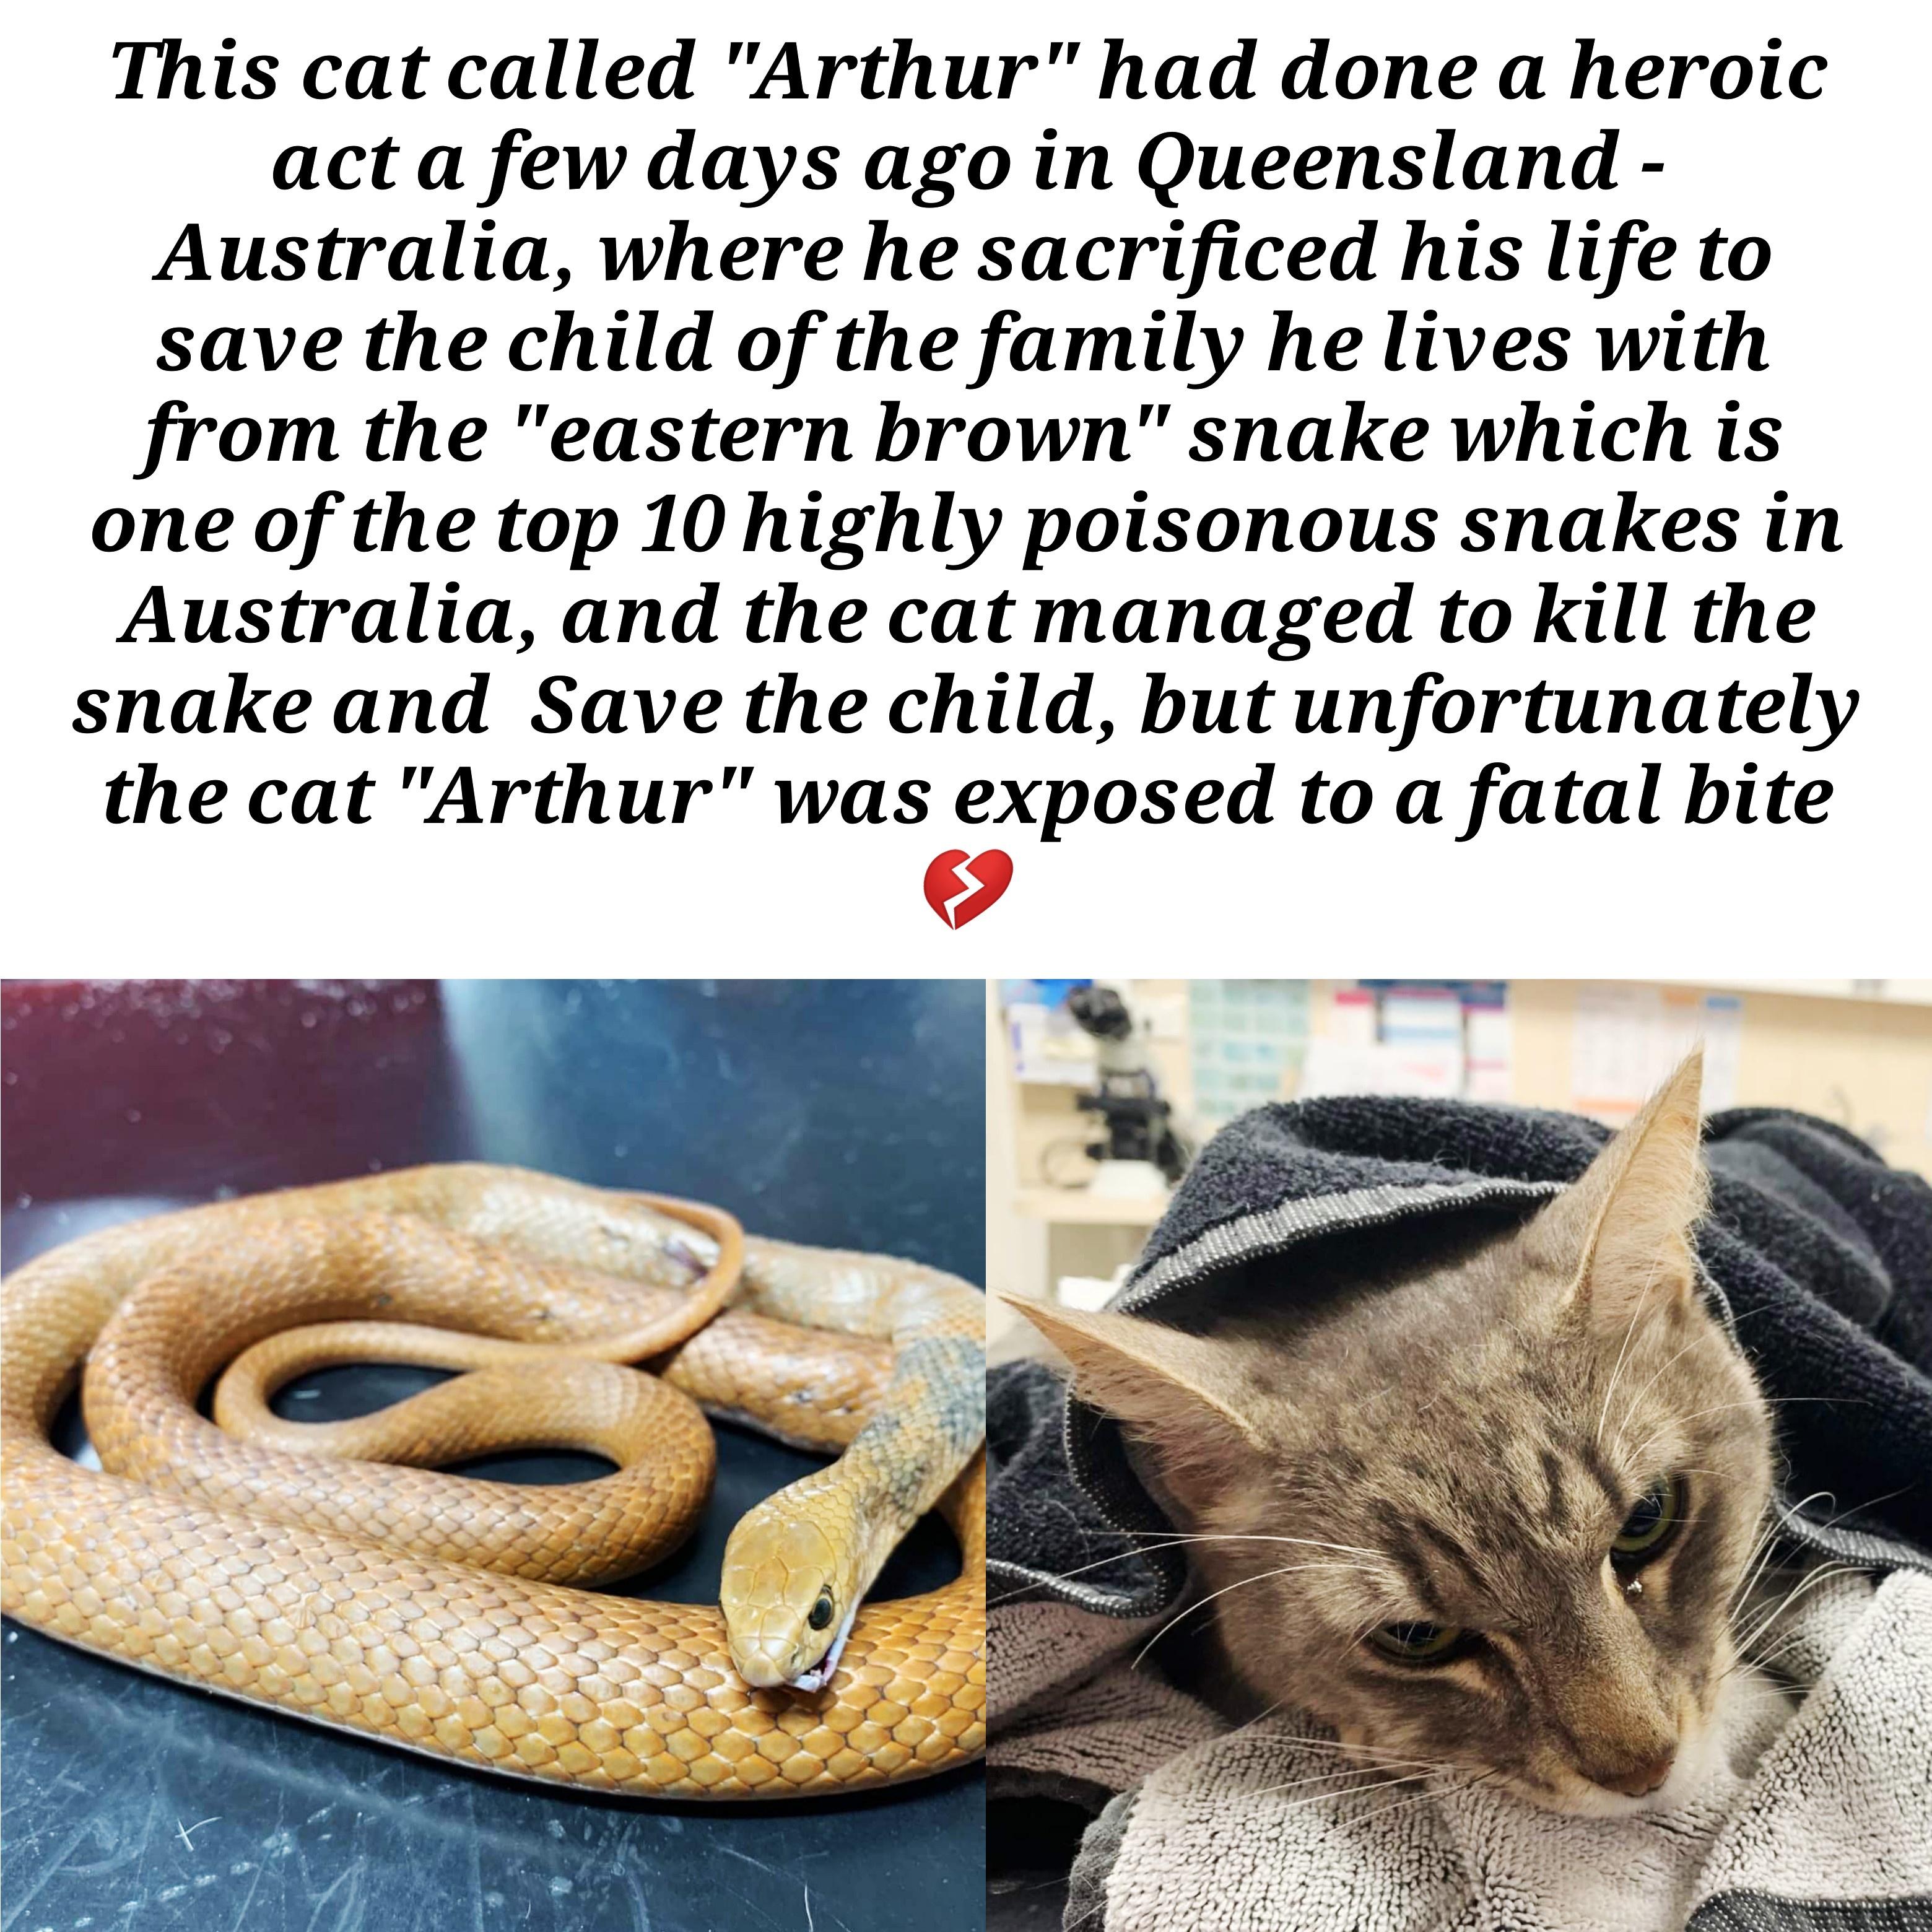 Snake - This cat called "Arthur" had done a heroic act a few days ago in Queensland Australia, where he sacrificed his life to save the child of the family he lives with from the "eastern brown" snake which is one of the top 10 highly poisonous snakes in…